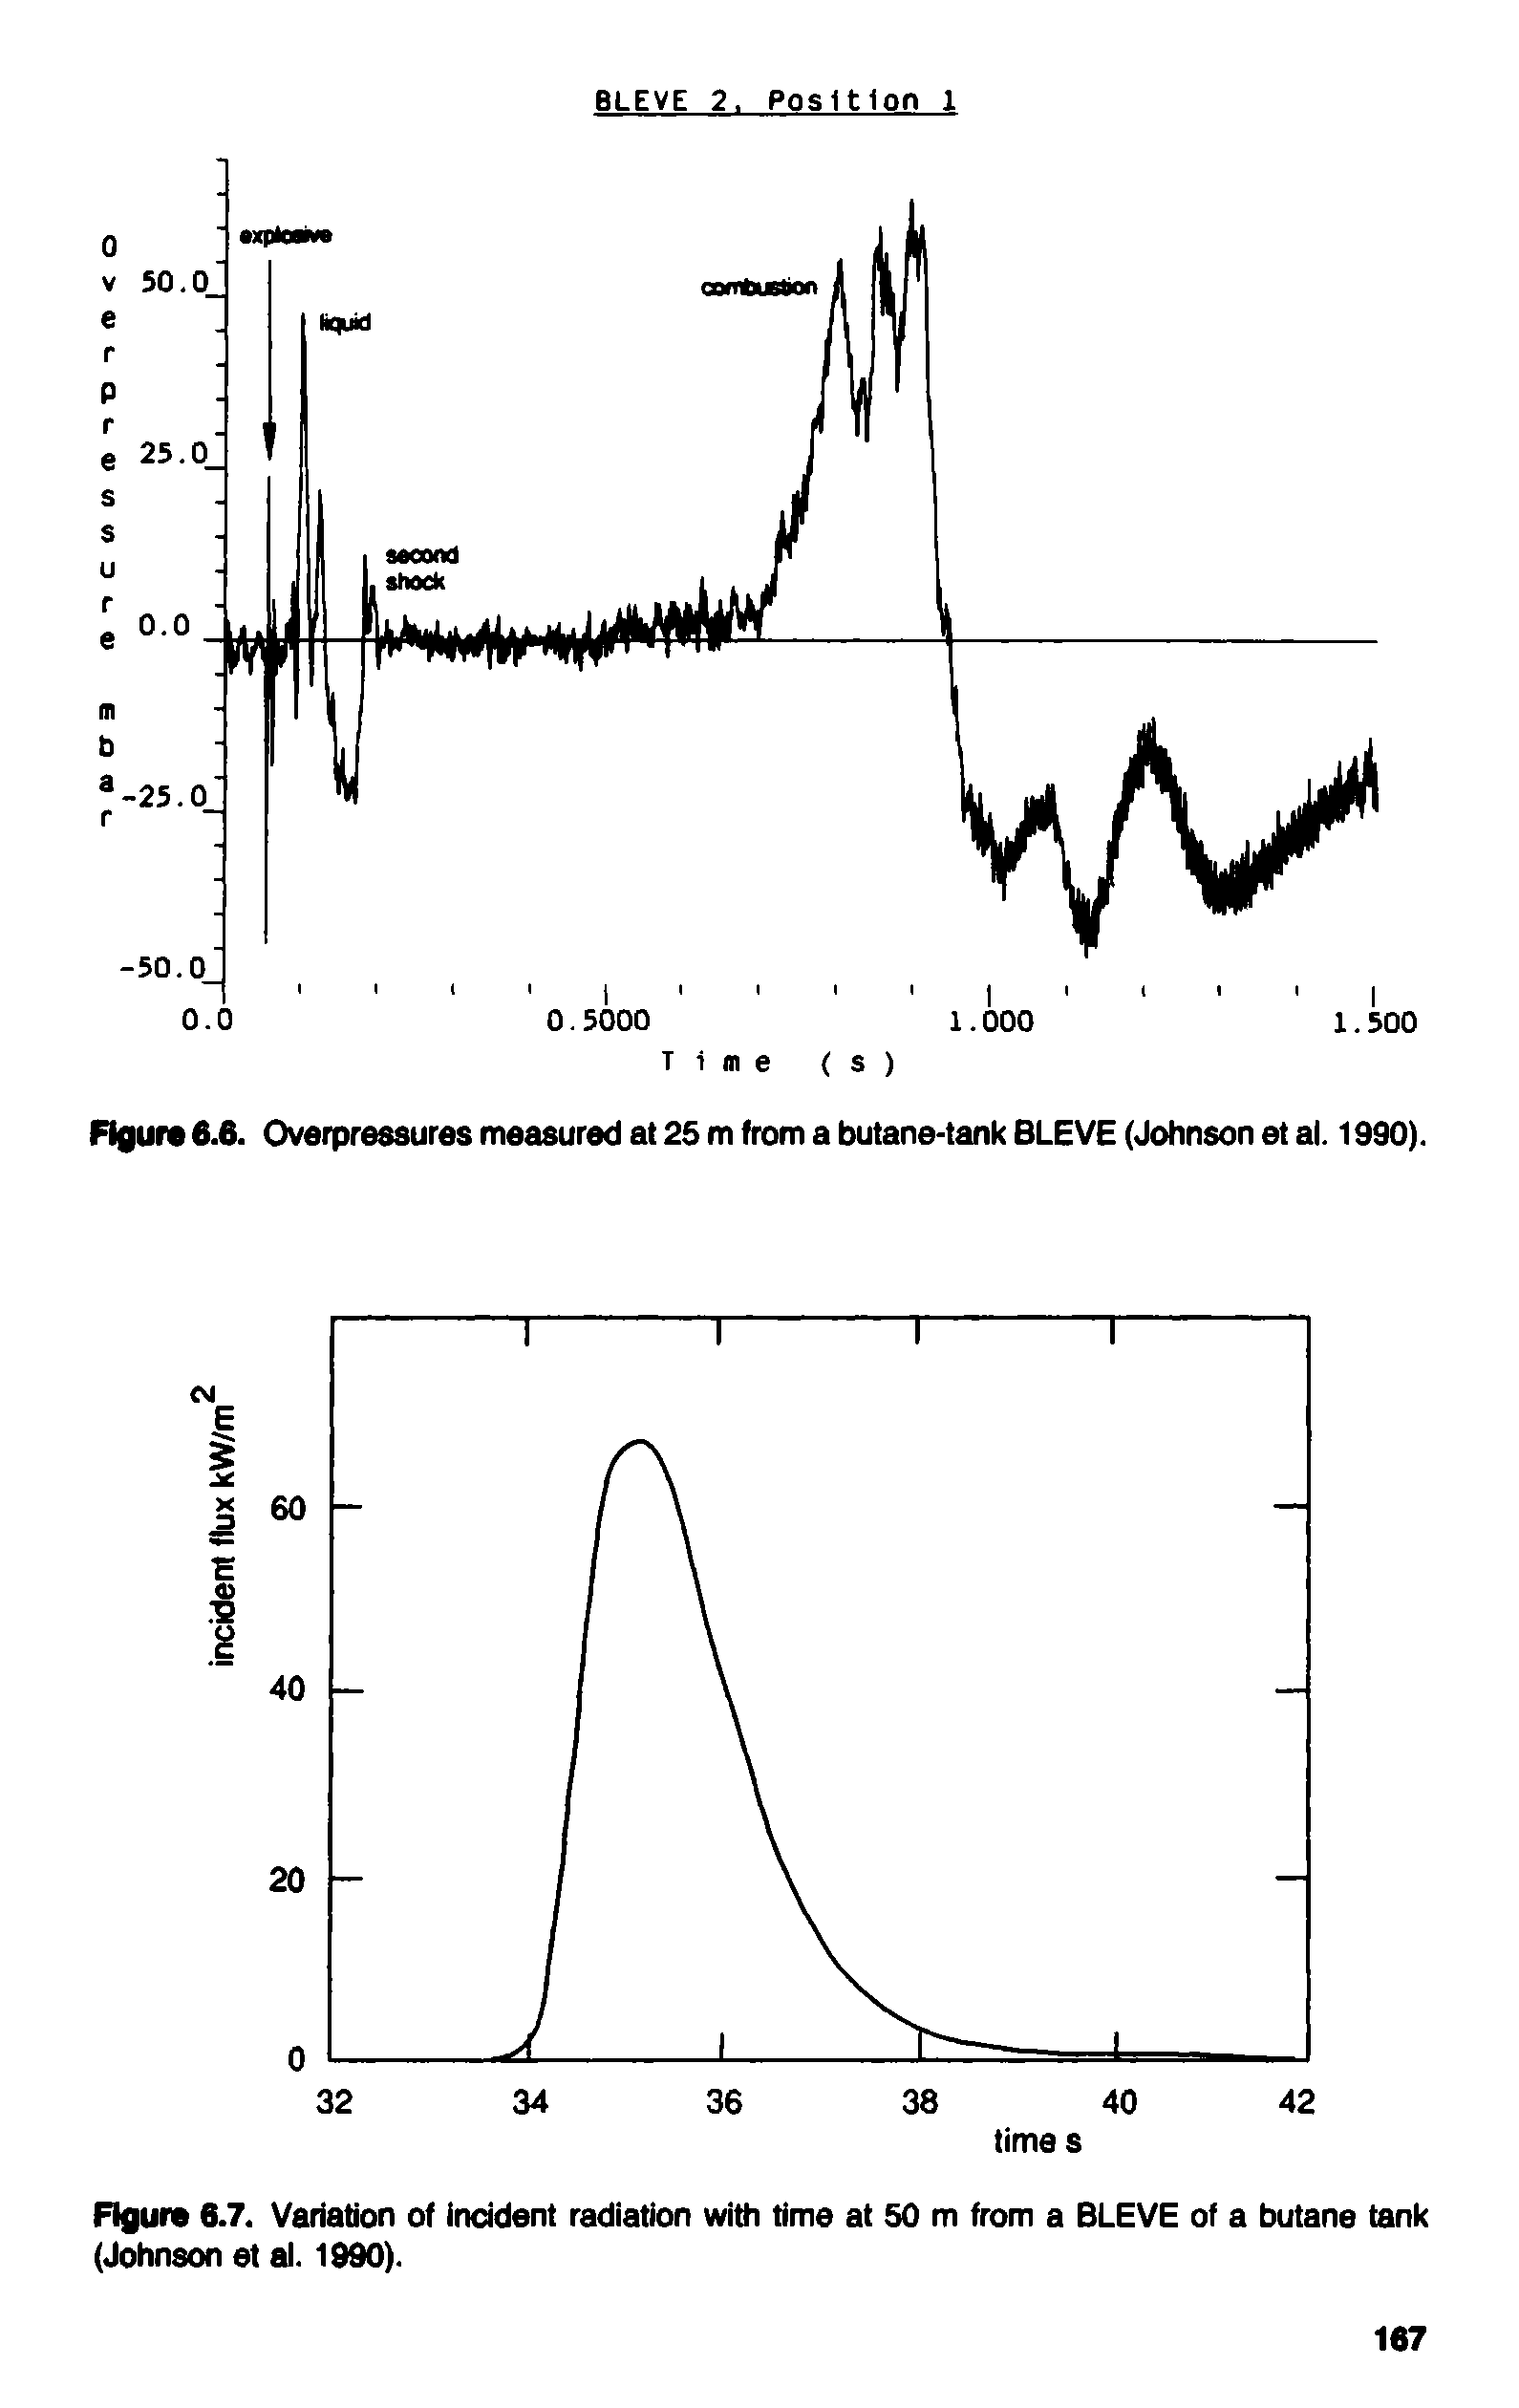 Figure 6.7. Variation of incident radiation with time at 50 m from a BLEVE of a butane tank (Johnson et al. 1990).